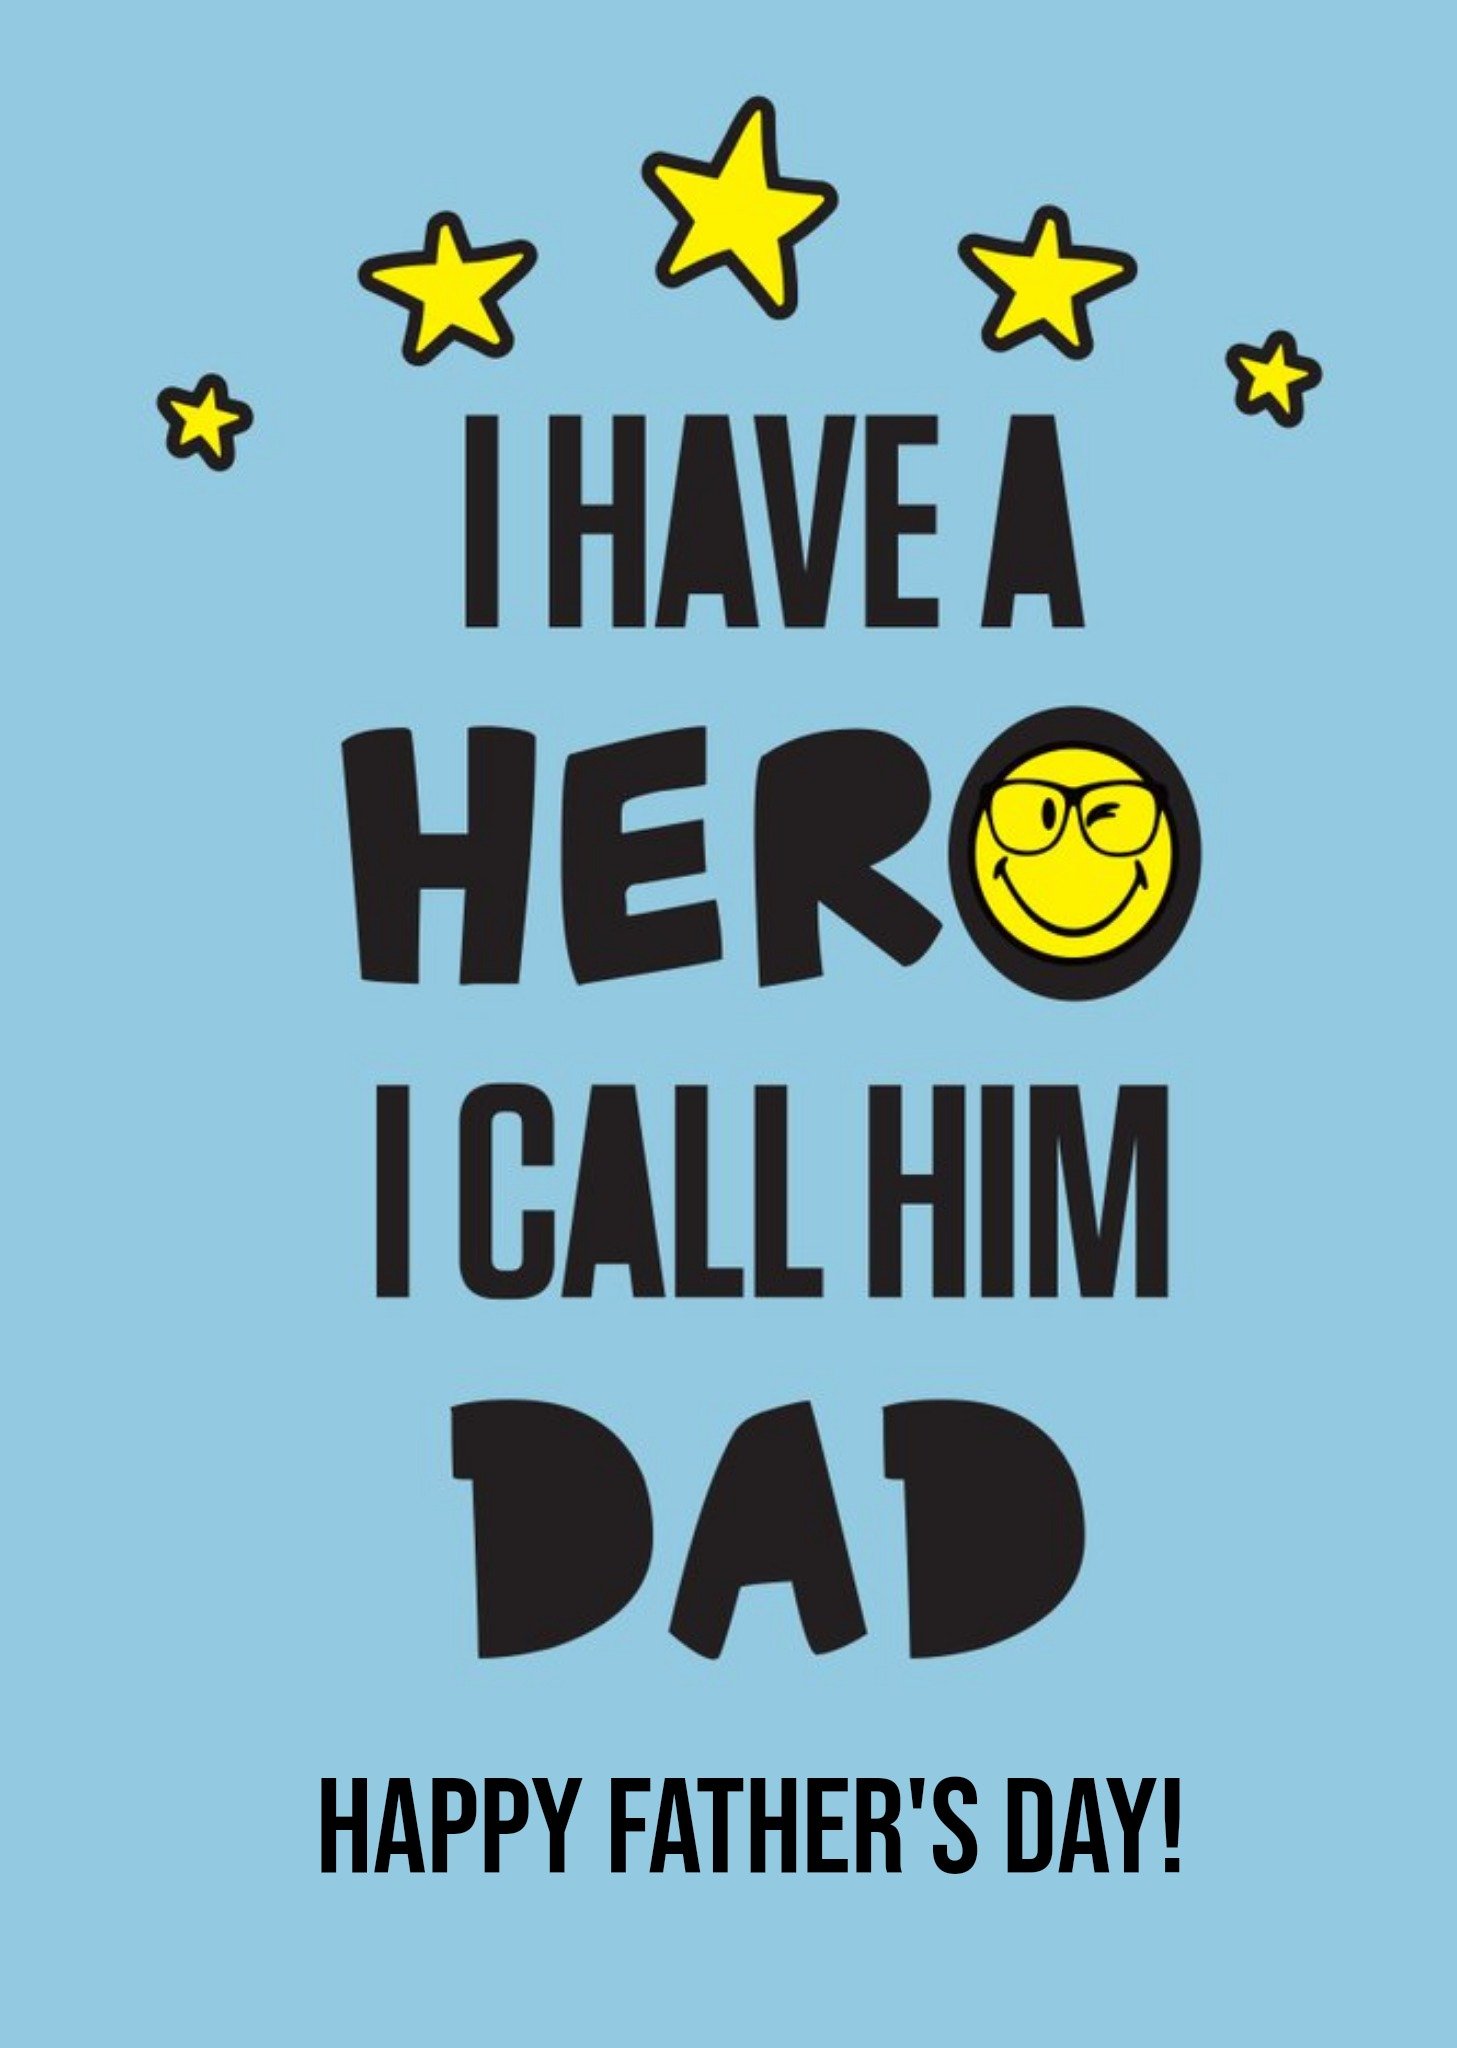 Moonpig Smiley World I Have A Hero That I Call Dad Happy Father's Day Card Ecard